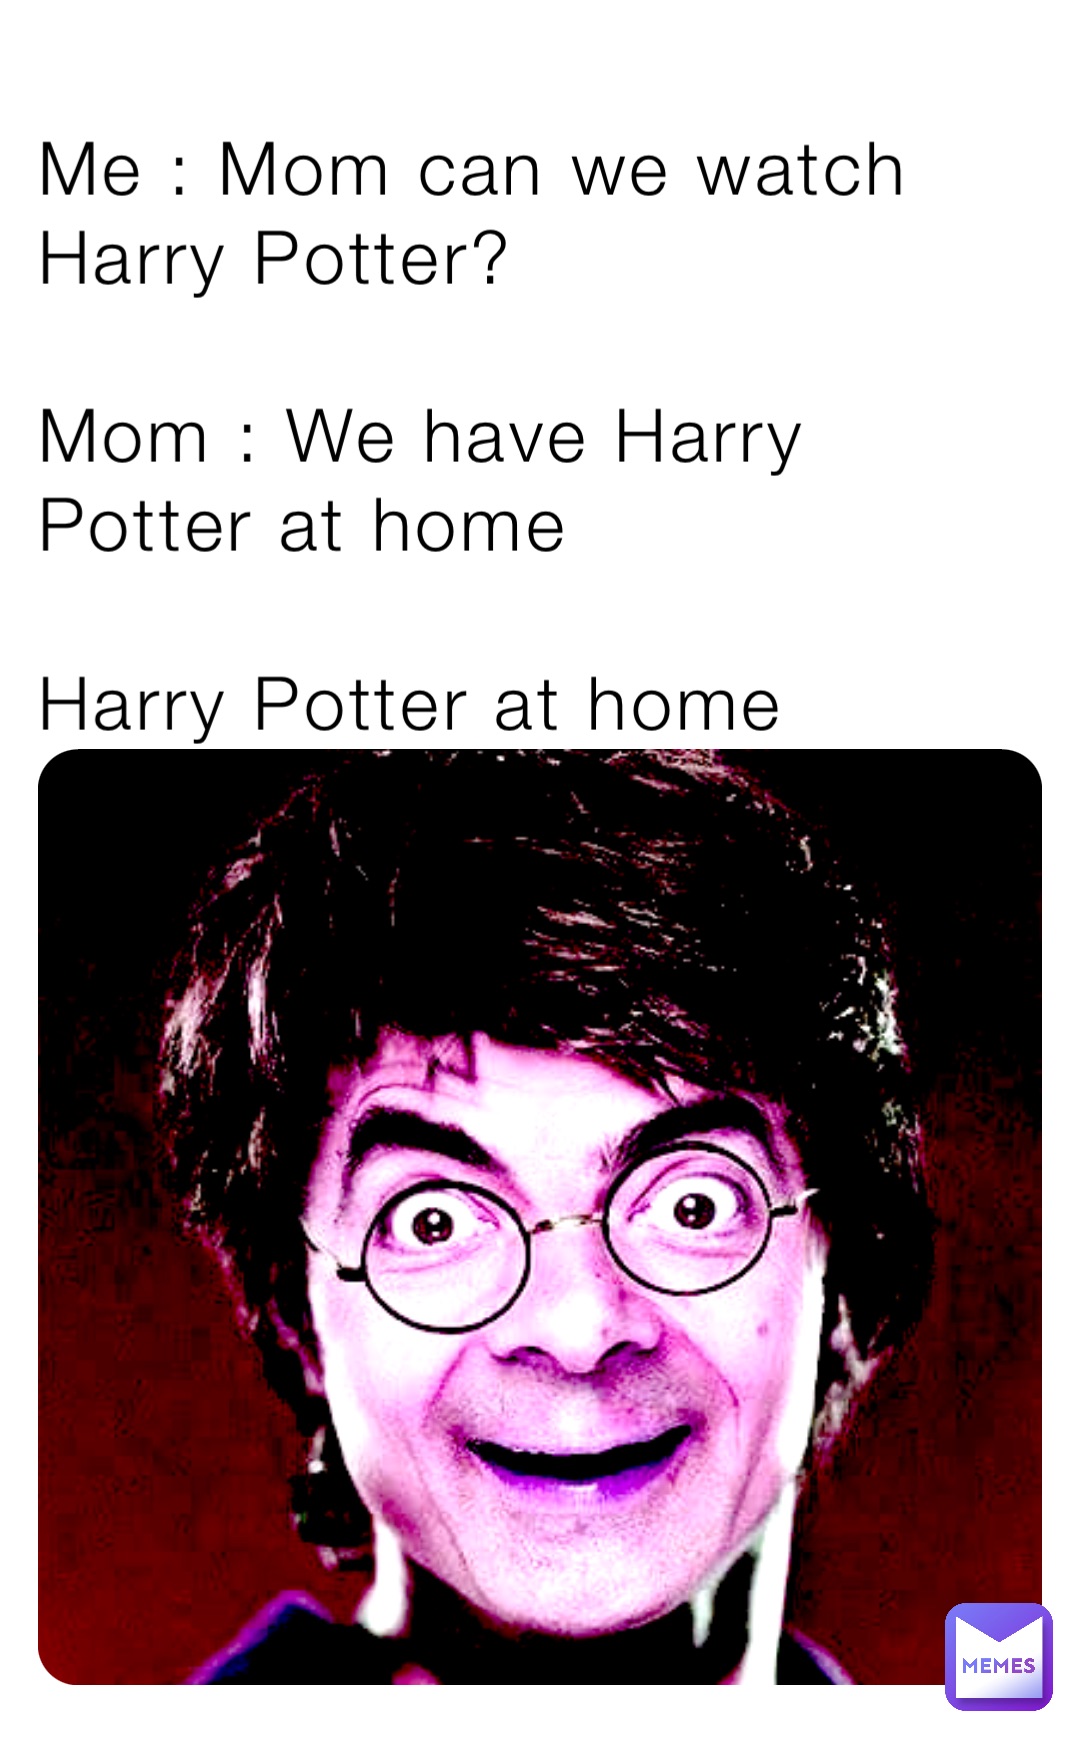 Me : Mom can we watch Harry Potter? 

Mom : We have Harry Potter at home 

Harry Potter at home